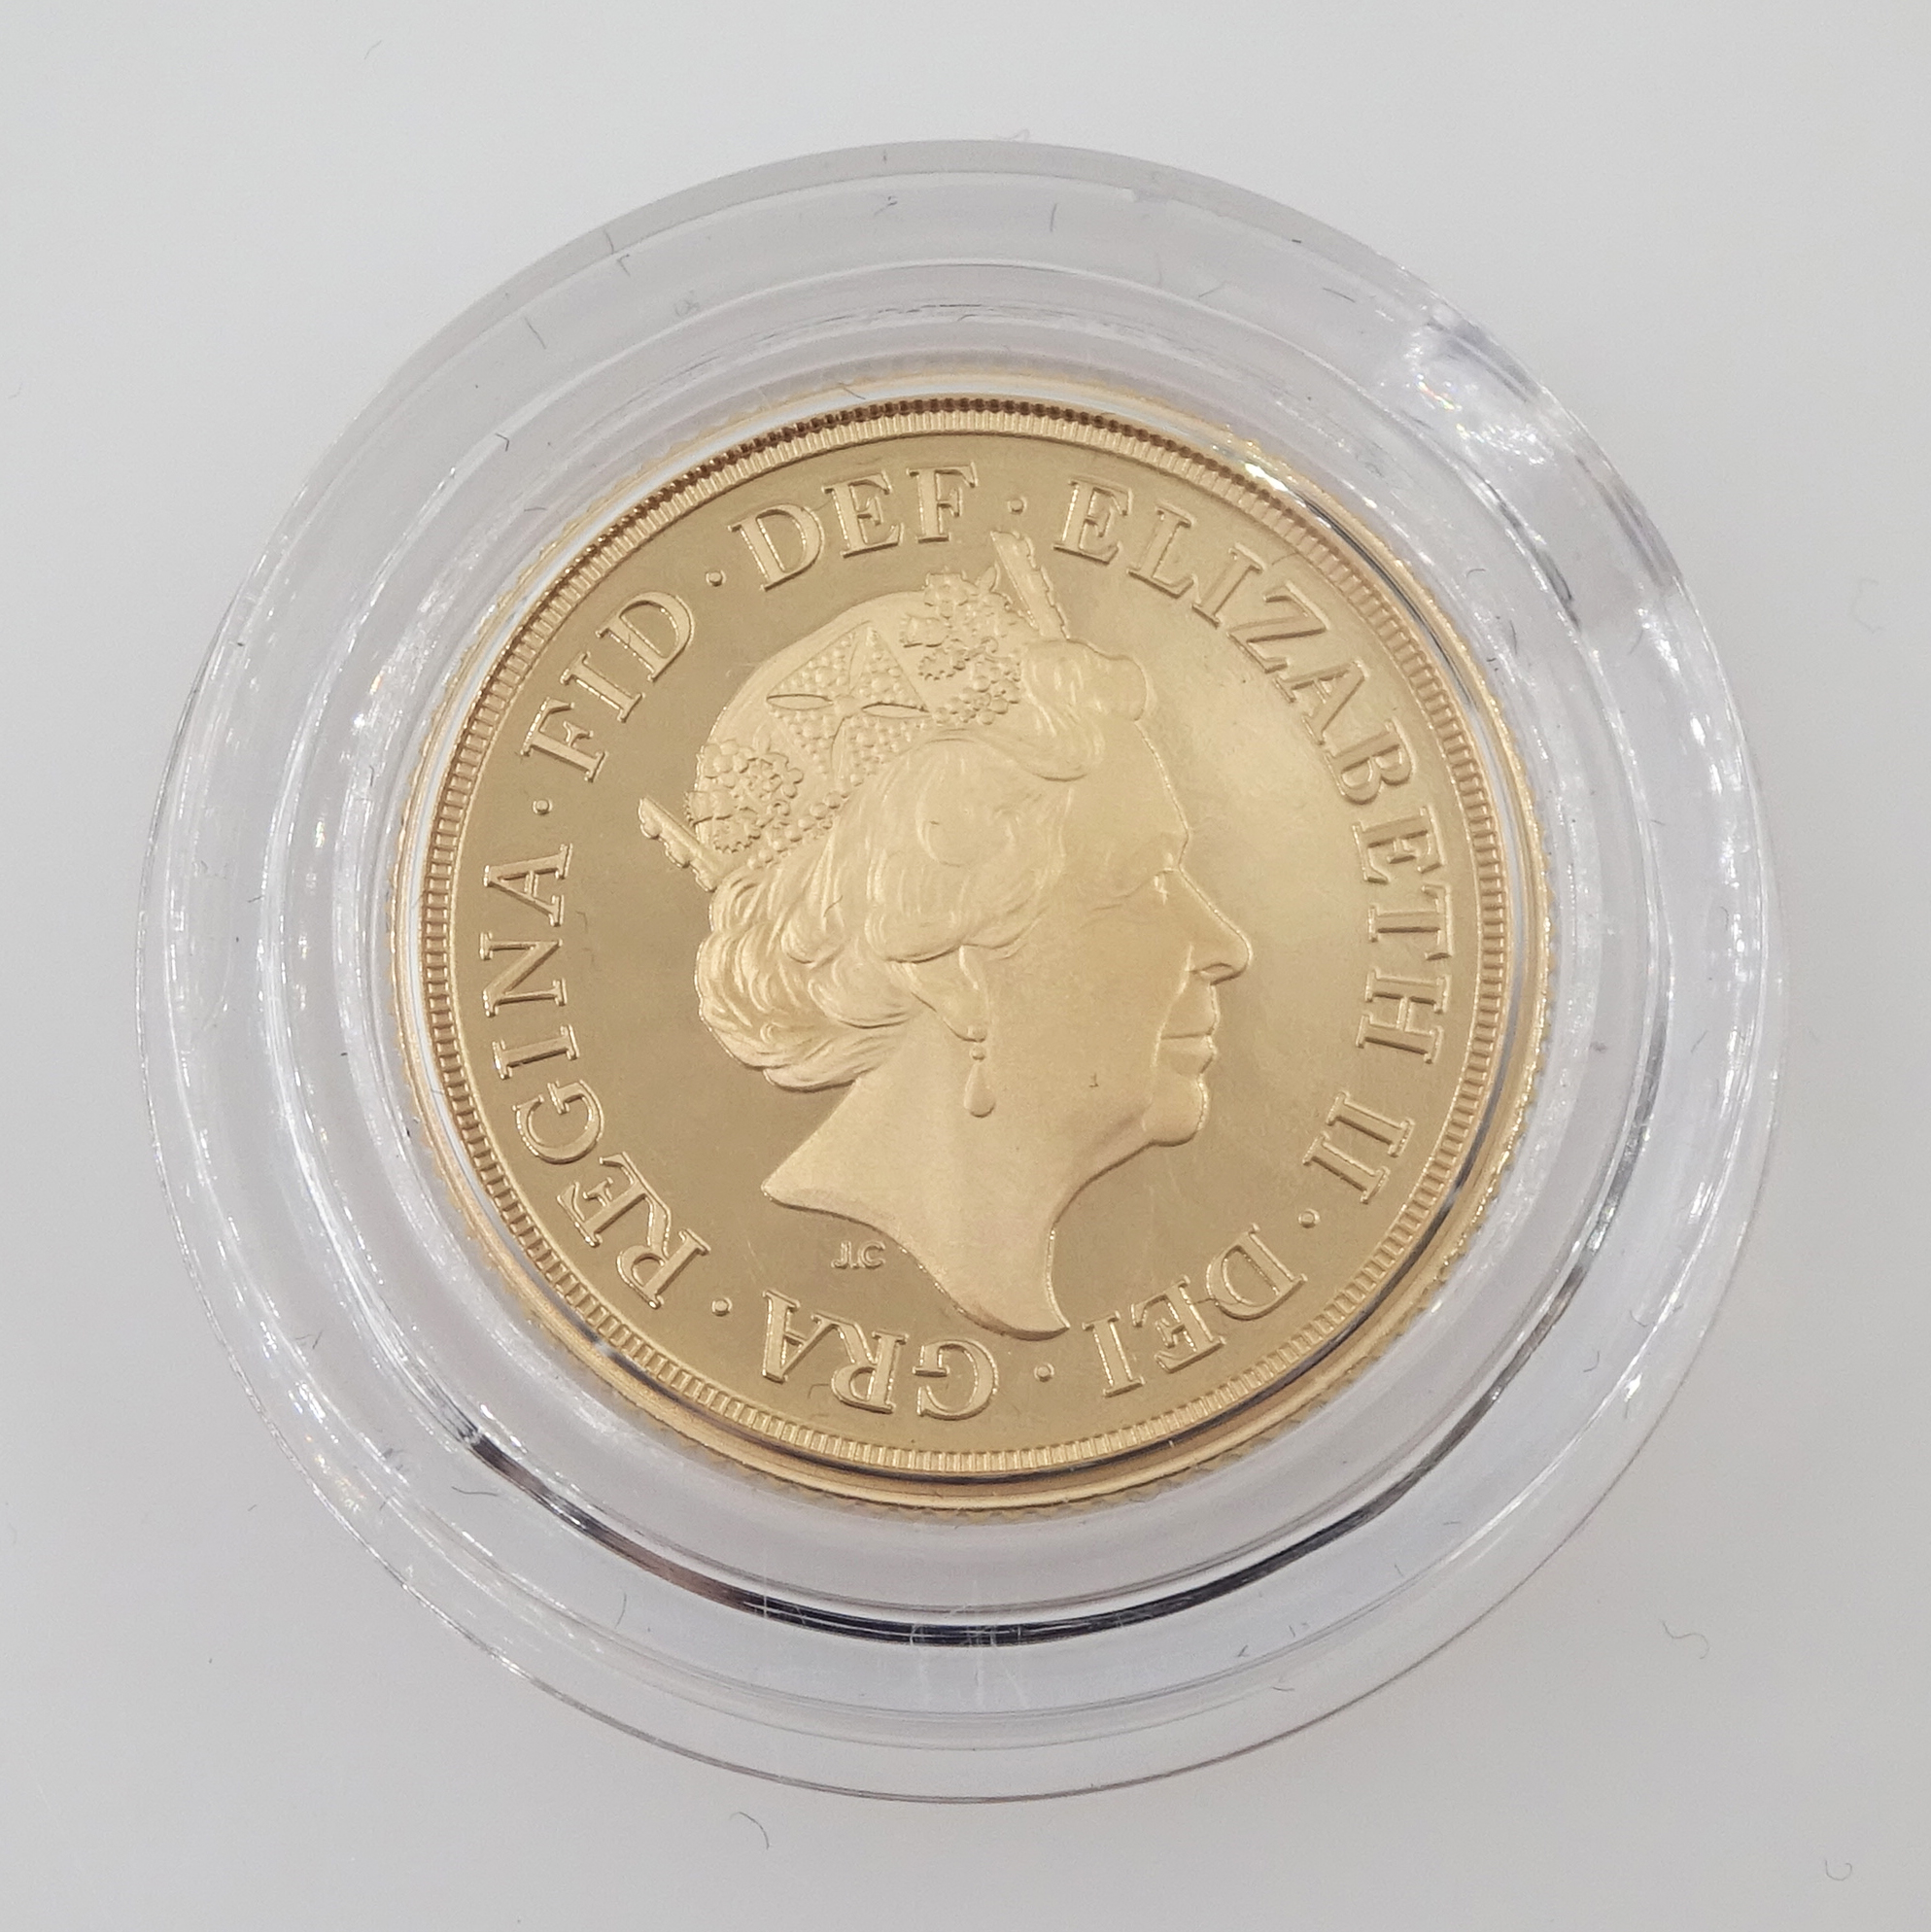 Queen Elizabeth II 2019 gold proof full sovereign coin, cased with certificate - Image 3 of 5